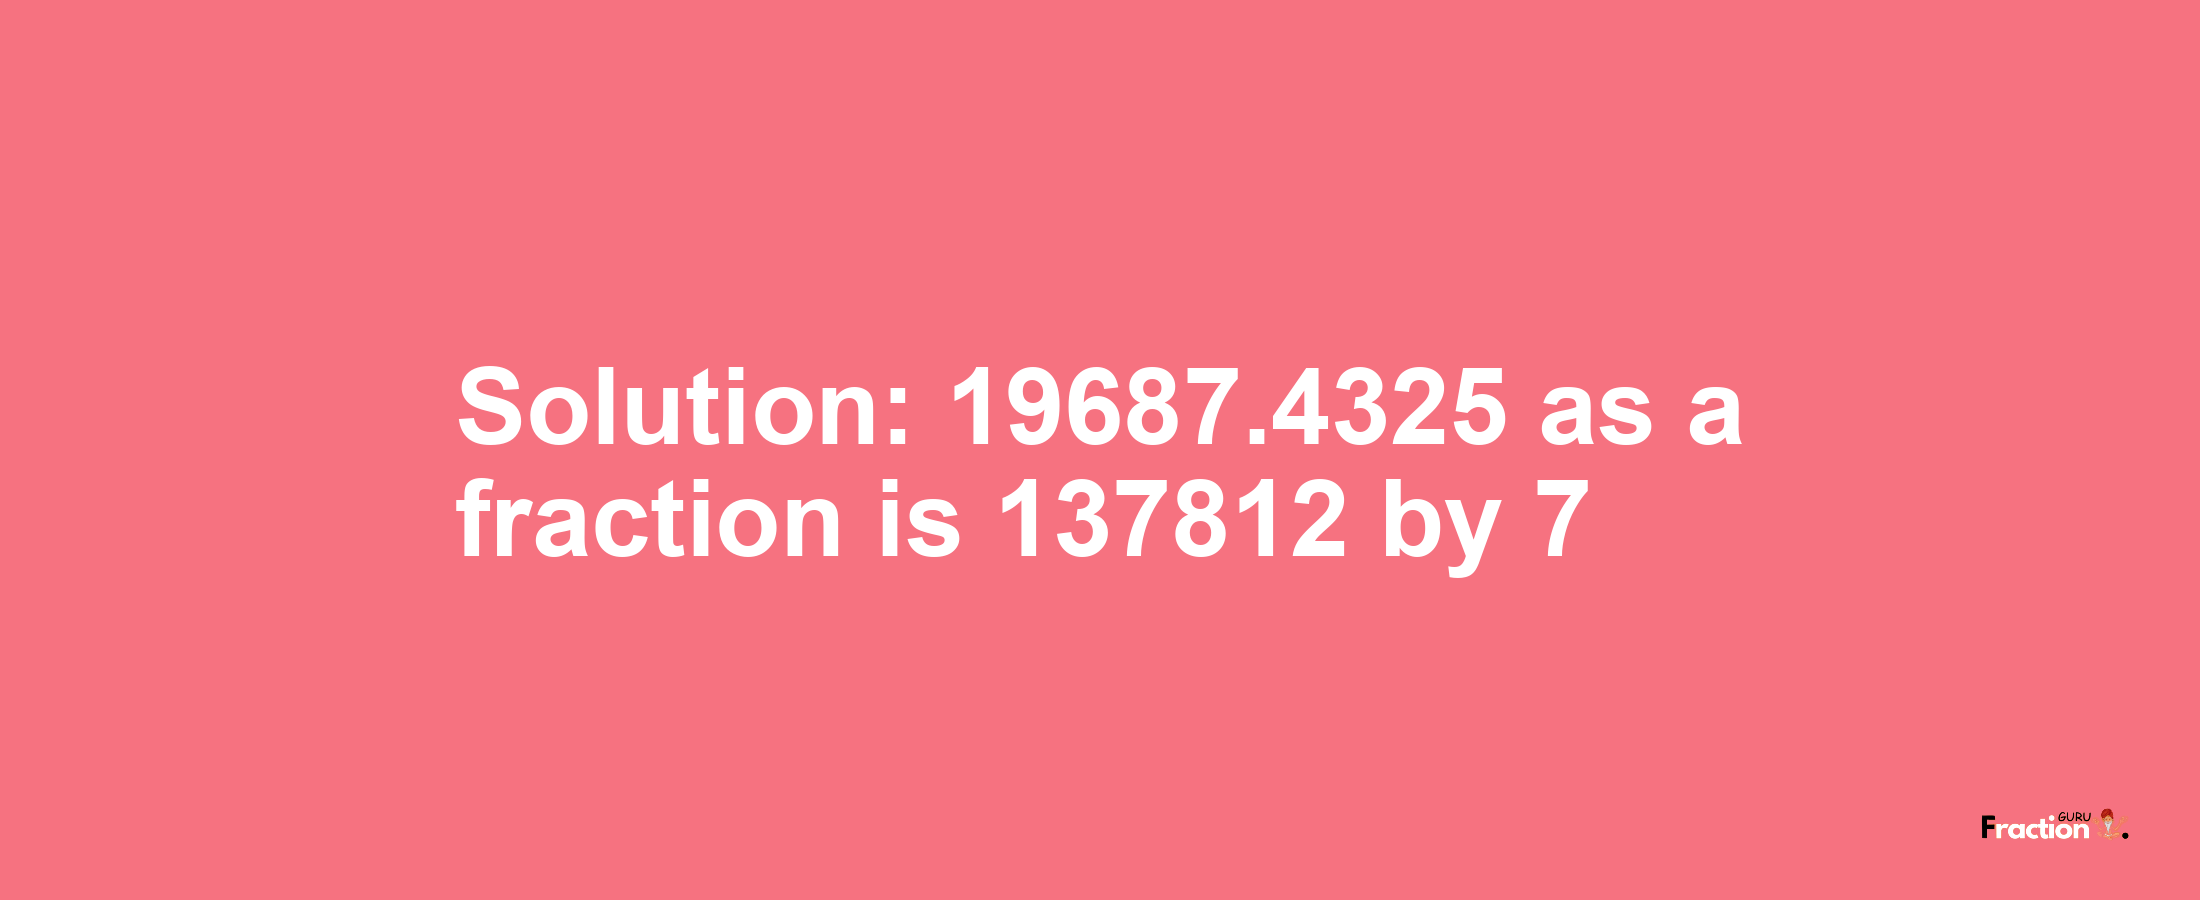 Solution:19687.4325 as a fraction is 137812/7